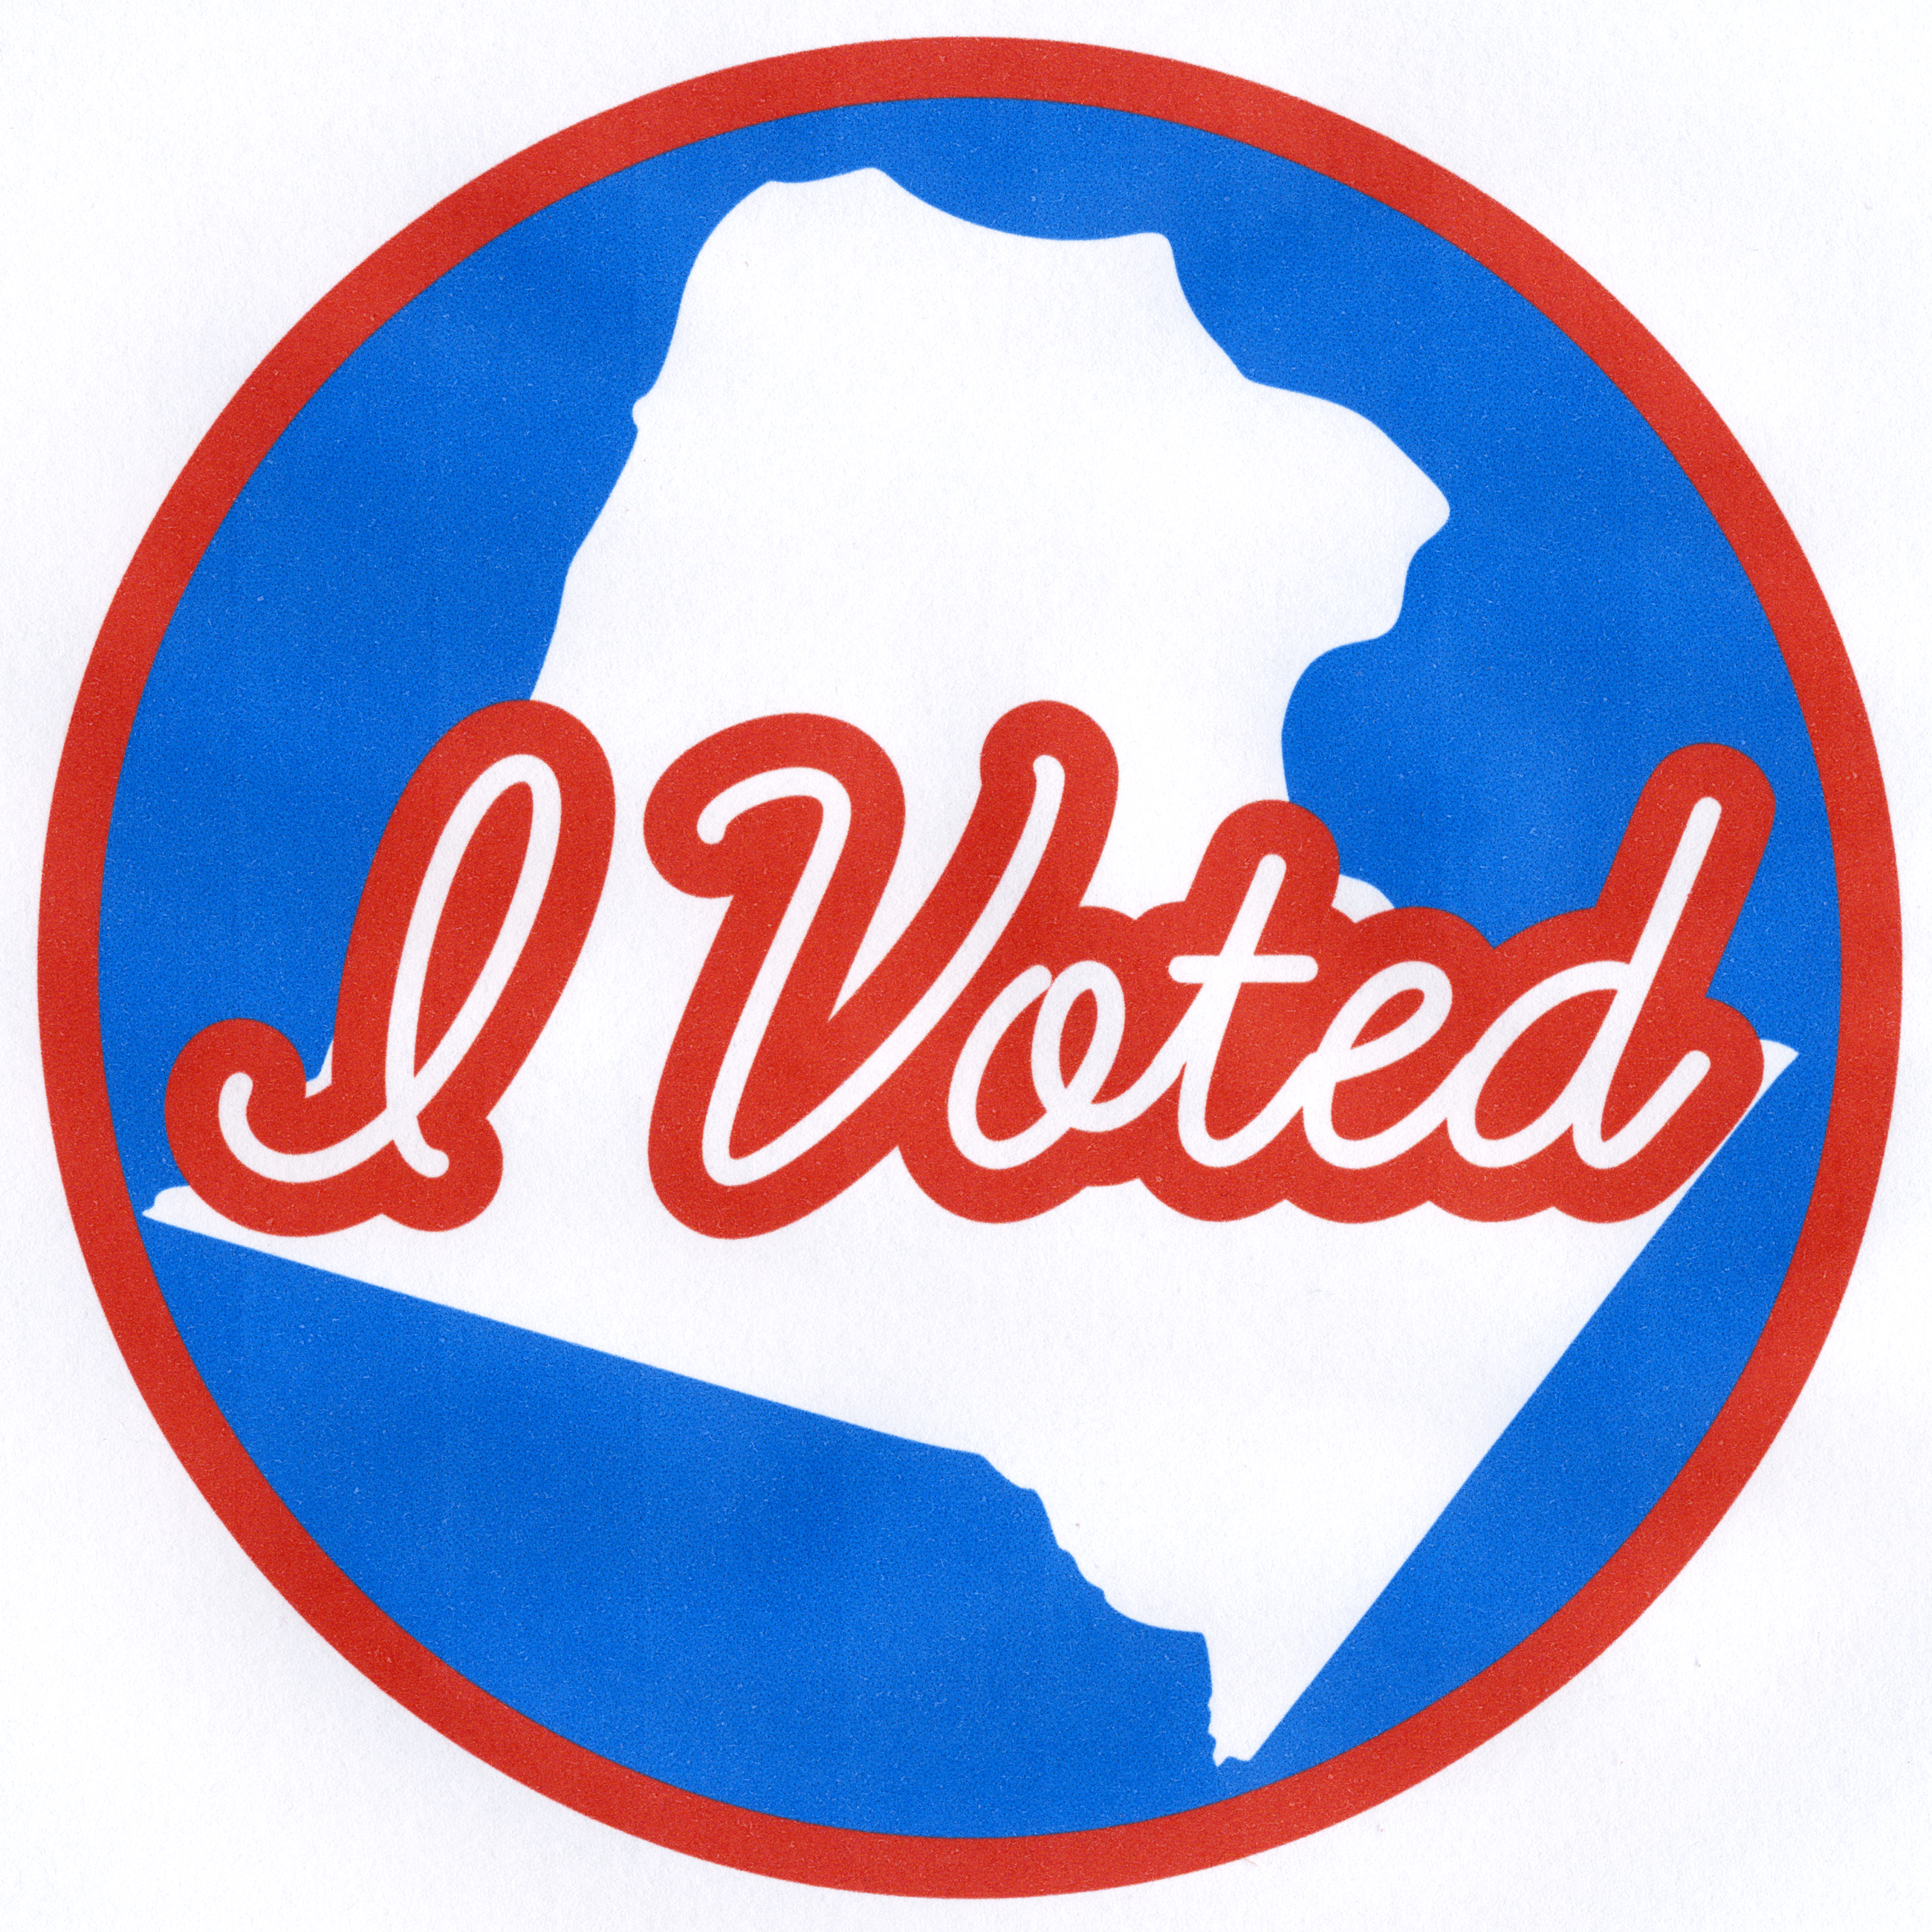 Image of In-person Early Voting Sticker